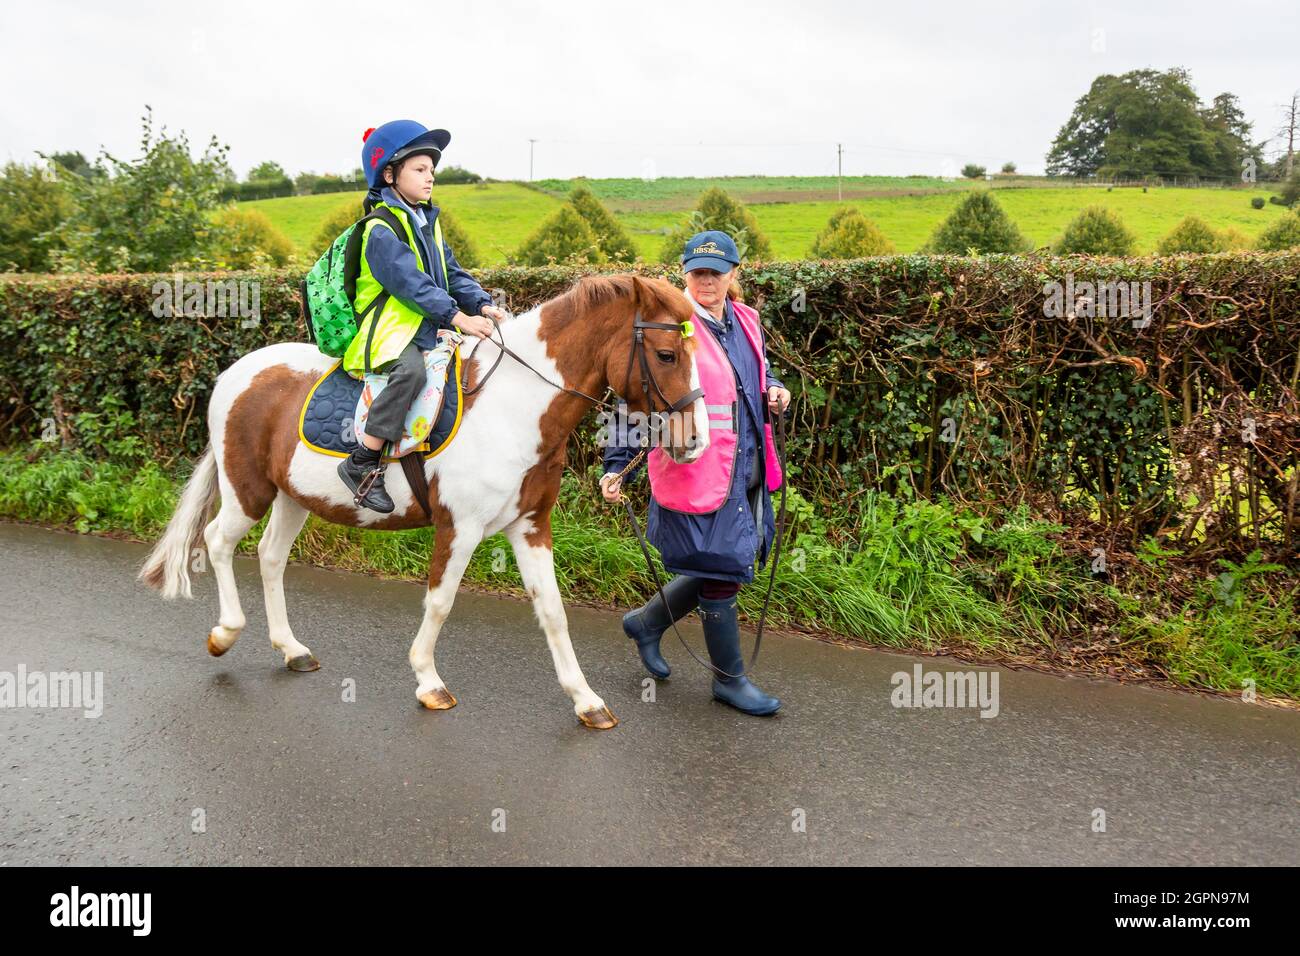 Upper Arley, Worcestershire, UK. 30th Sep, 2021. Grandmother Jane Mundie beats the fuel shortage crisis by using her pony 'Fern' on the school run. Her grandson Henley, 8, confidently rides the pony the two miles to Upper Arley C of E primary school in rural Worcestershire. 'I can't get diesel for my Land Rover at the moment but we don't need to worry too much when the children have our pony, Fern. And it's definitely a fun and green way to get to school,' says Jane. Credit: Peter Lopeman/Alamy Live News Stock Photo